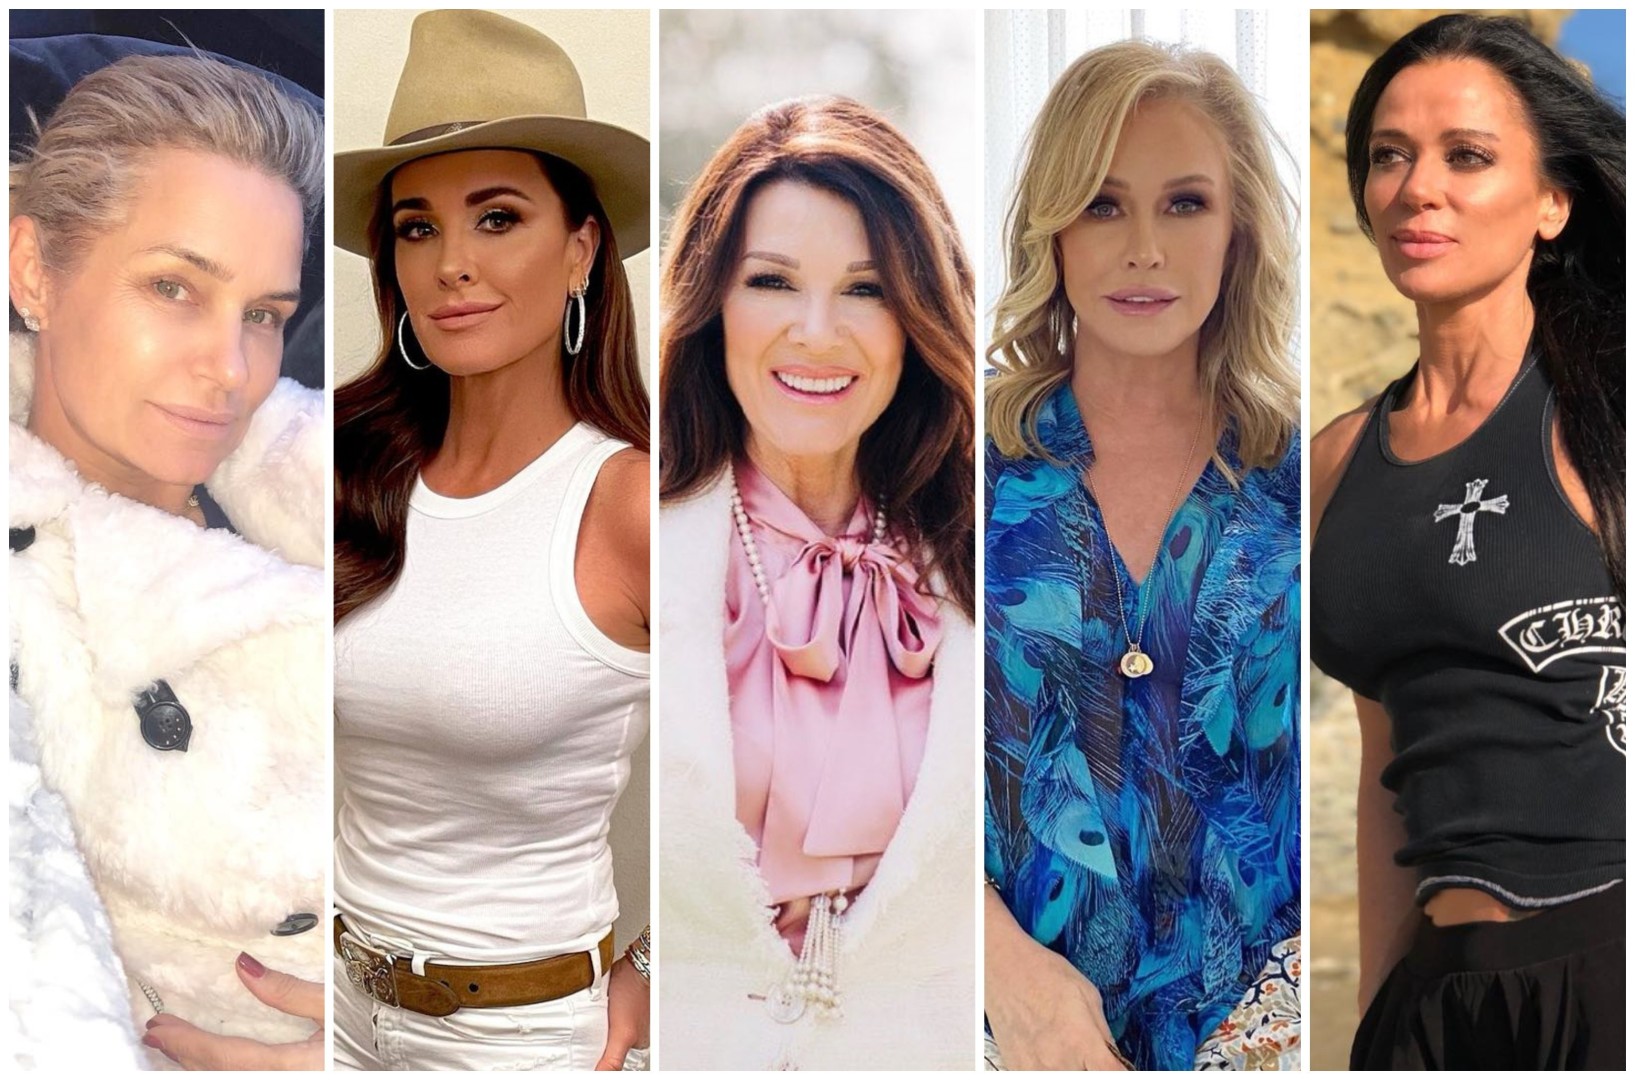 7 richest Real Housewives of Beverly Hills of all time, ranked: from Lisa  Vanderpump and Yolanda Hadid to sisters Kyle Richards and Kathy Hilton,  it's the Wiccan witch who scores highest net